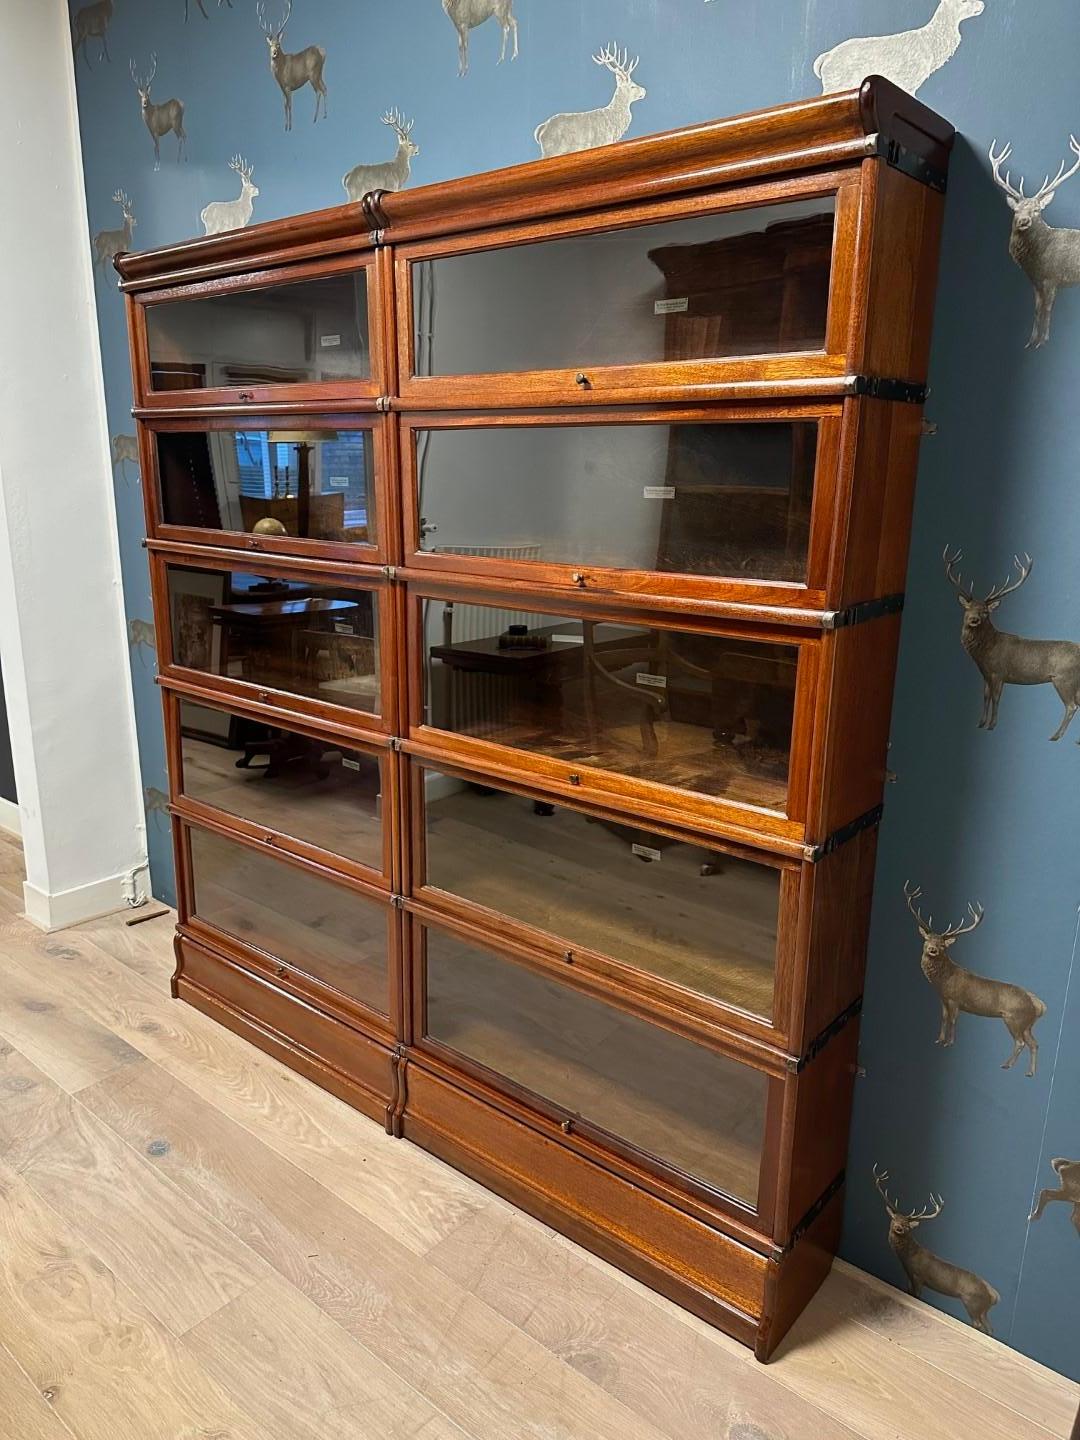 Beautiful antique mahogany Globe Wernicke bookcase. The cabinet consists of 10 stackable parts. Arranged in 2 rows of 5 elements high.
Completely in perfect condition. Beautiful warm color.

Origin: England
Period: Approx. 1900
Size: 173cm x 26cm x